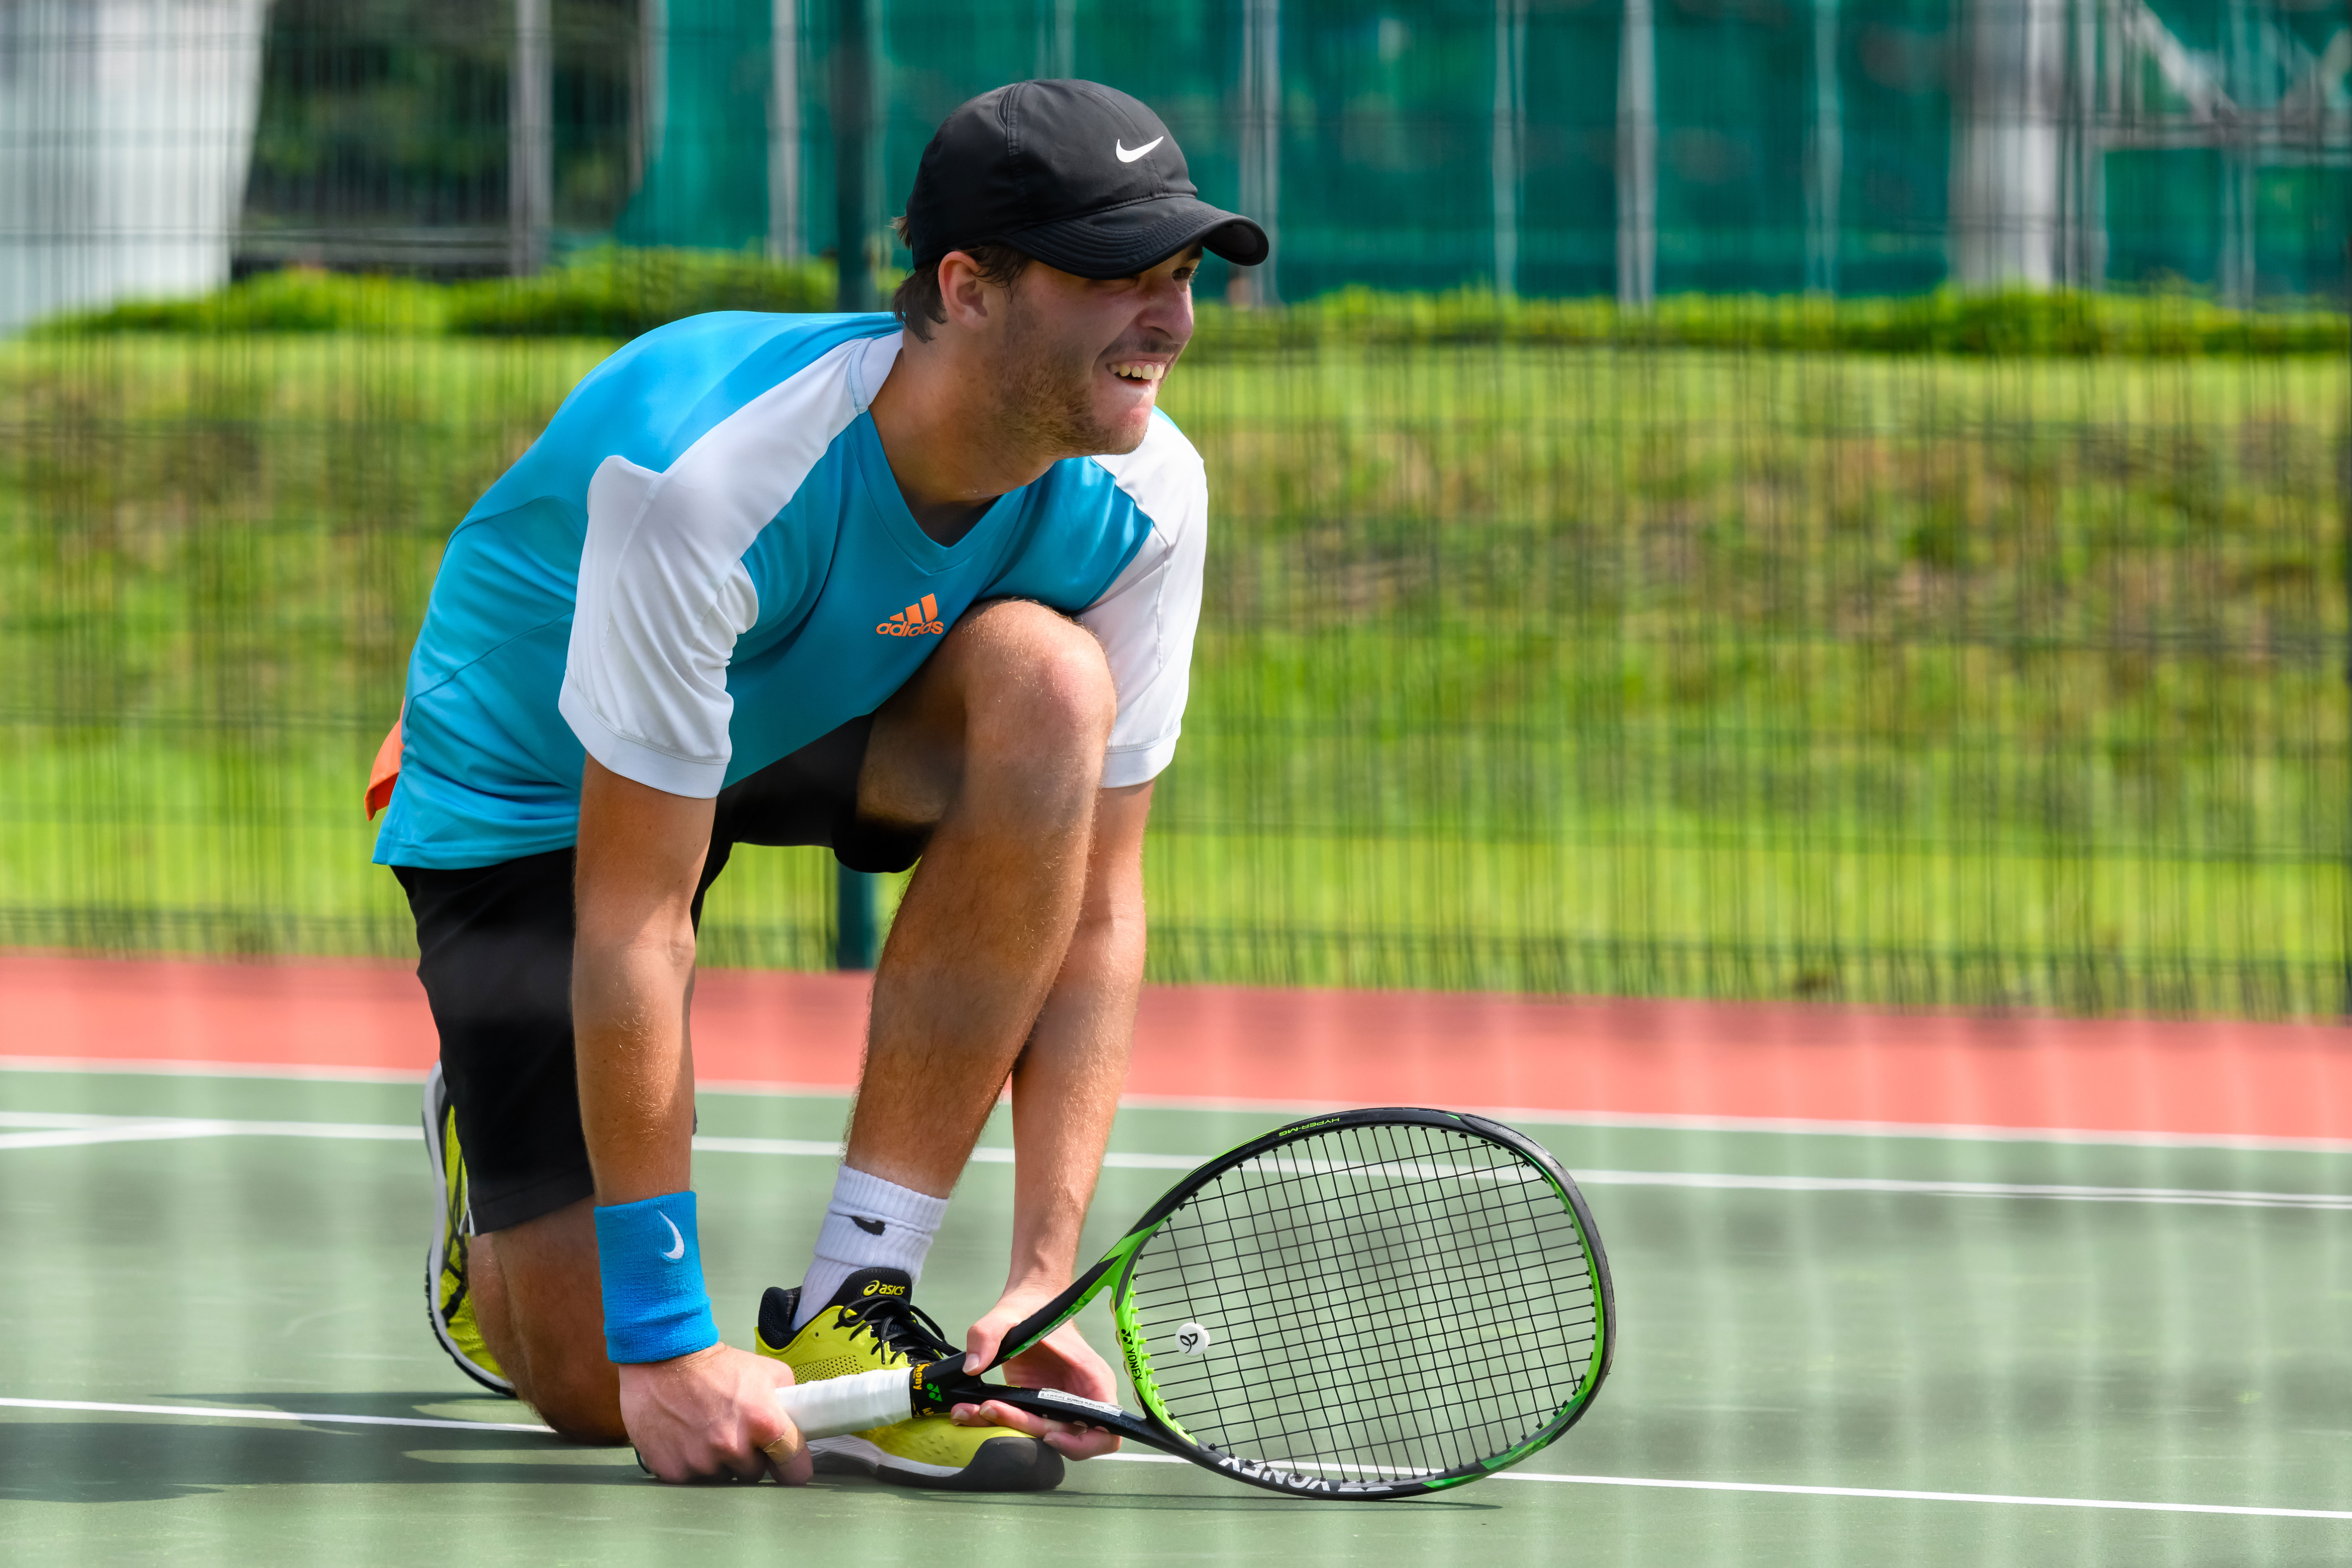 Romios ready in Toowoomba 13 October, 2018 All News News and Features News and Events Tennis Australia